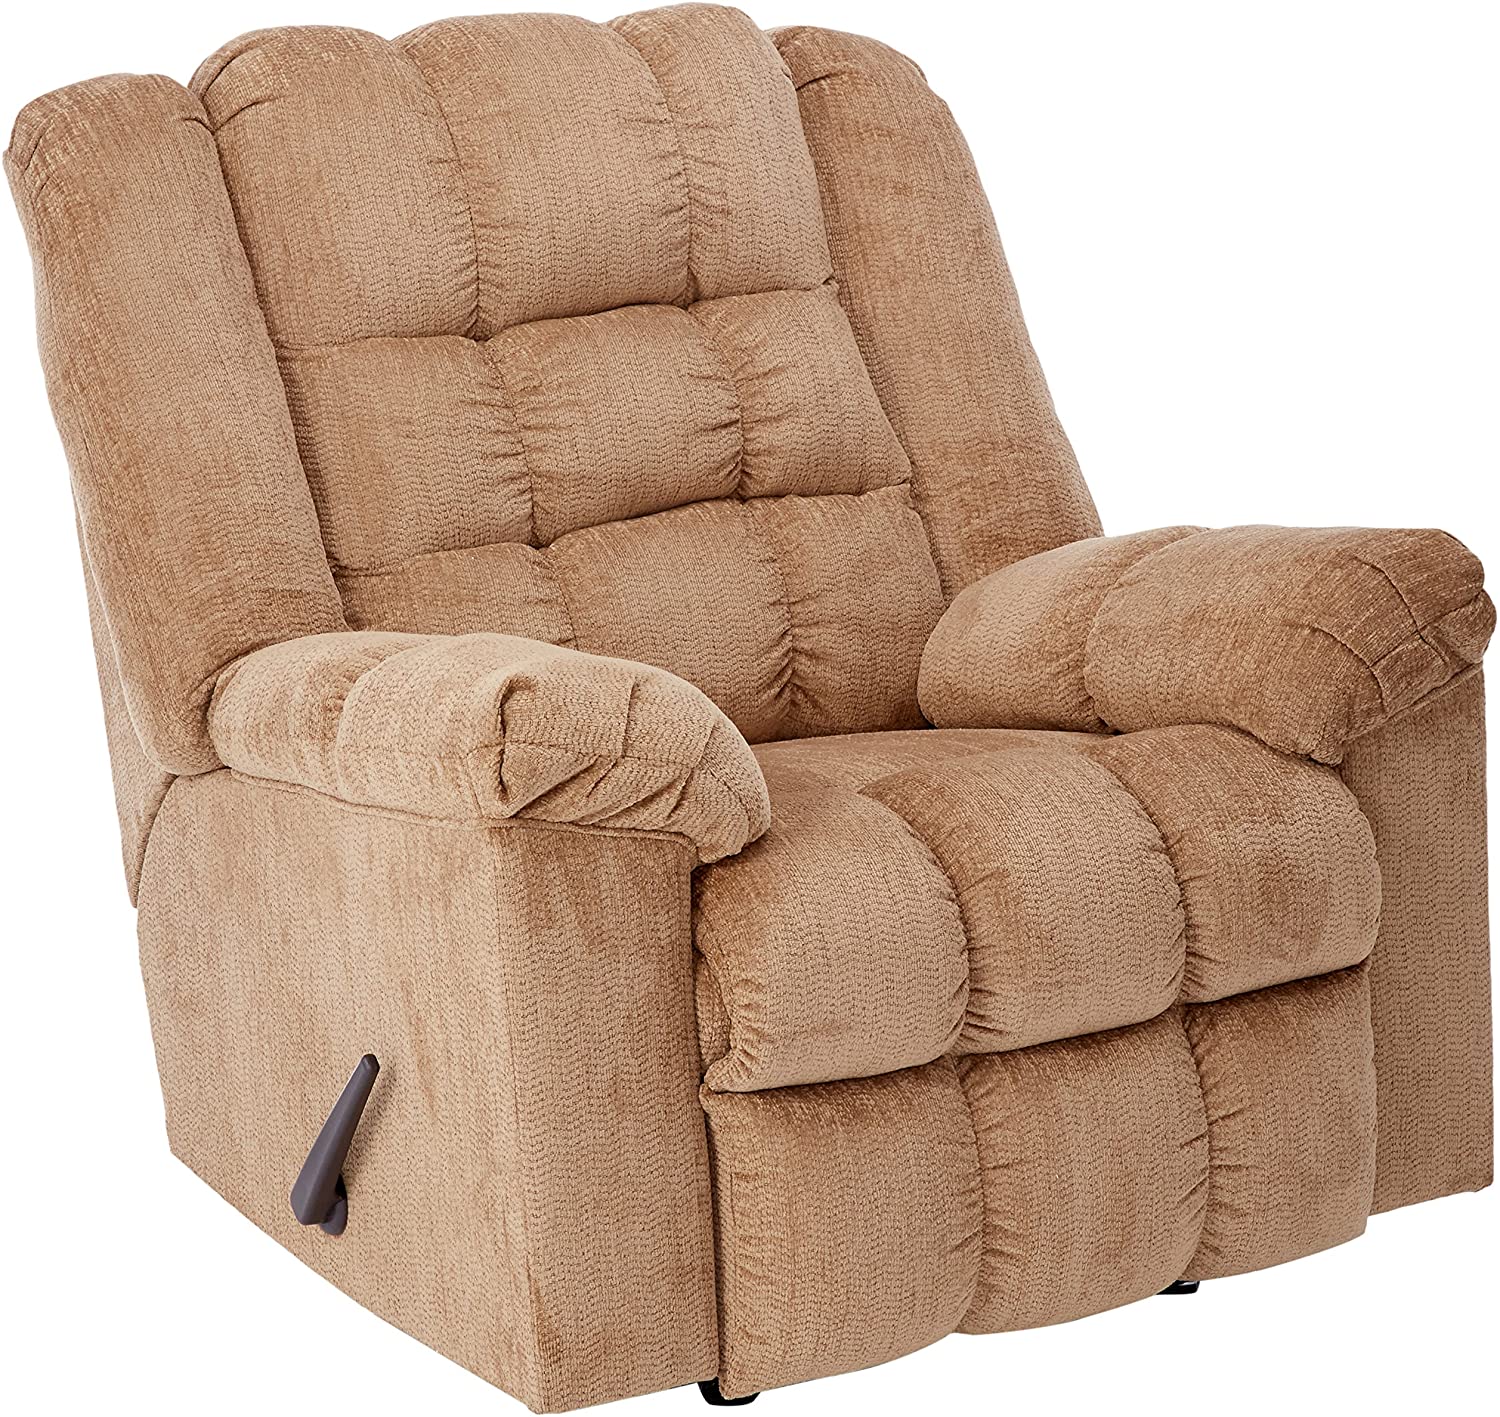 Recliner Chairs You Can Sleep In - Chairs: What is the best recliner